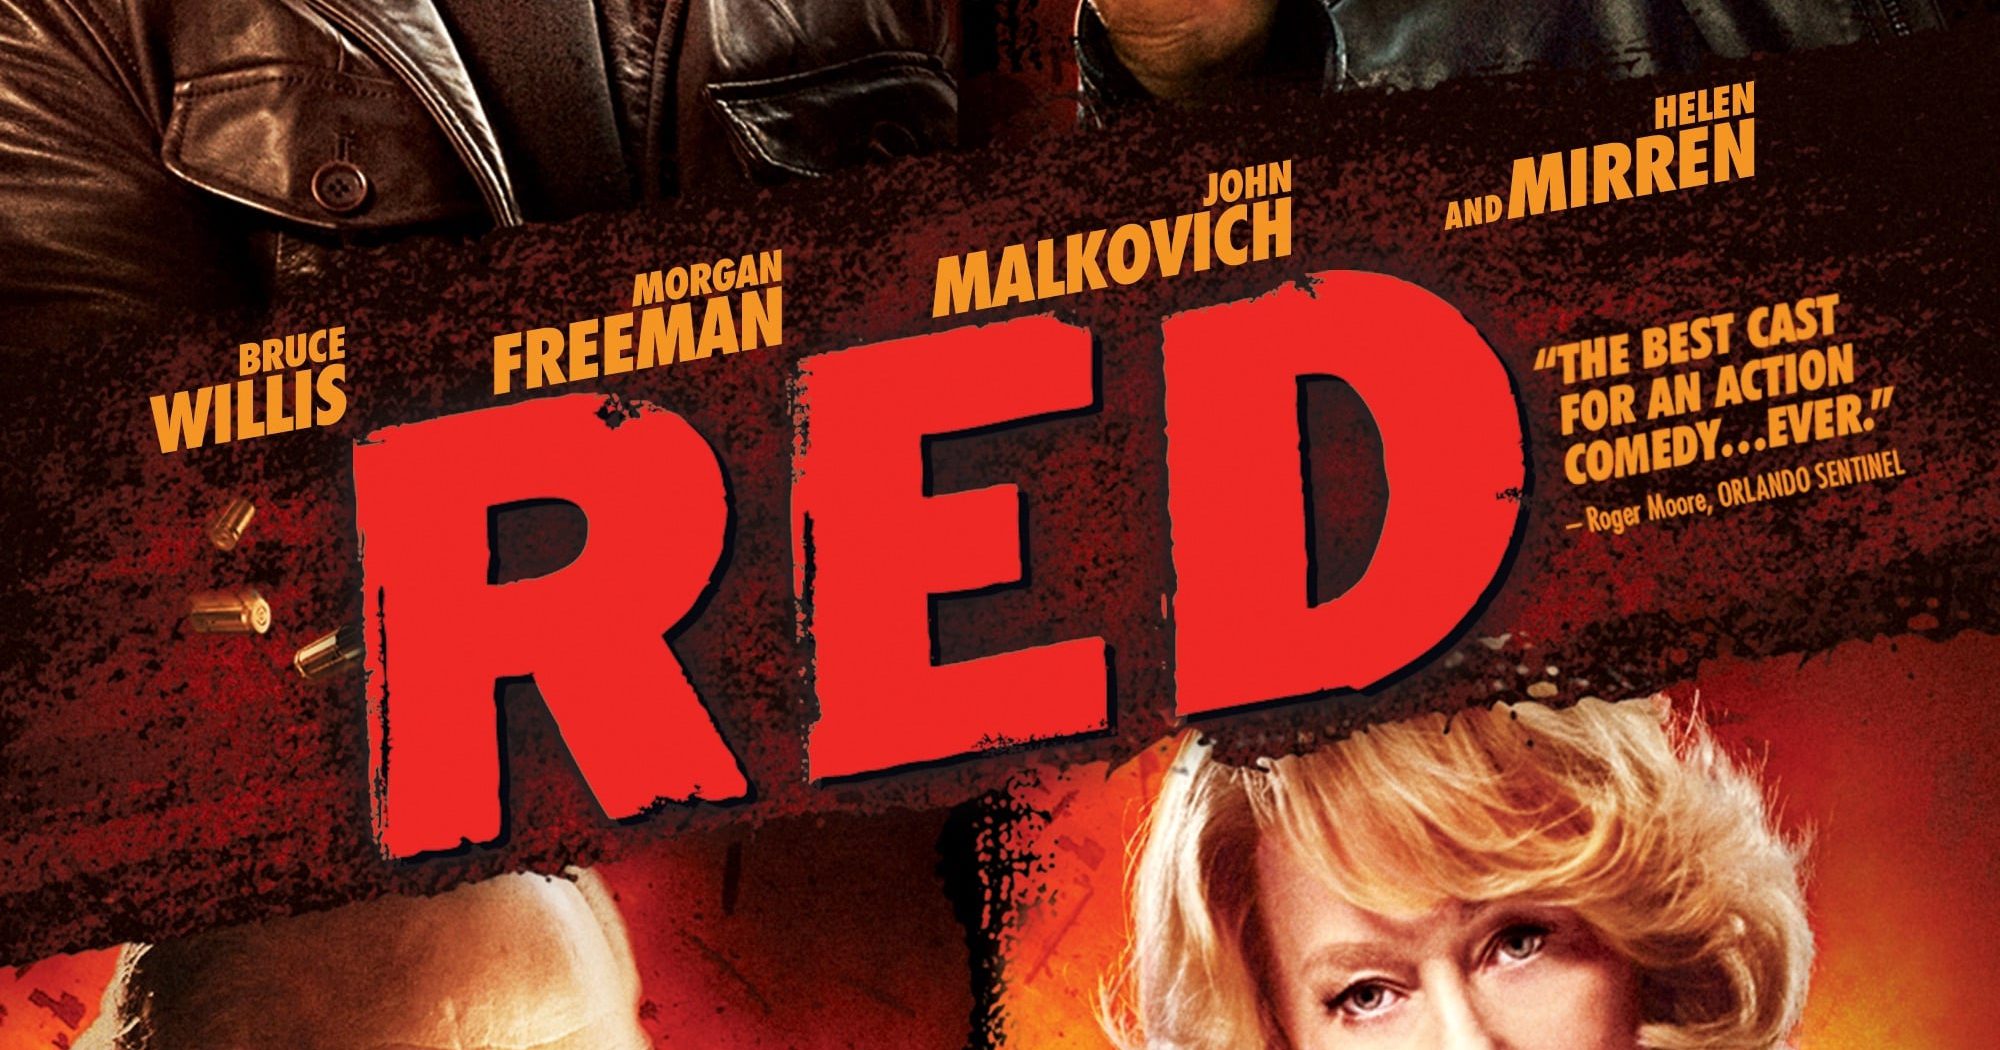 Poster for the movie "RED"